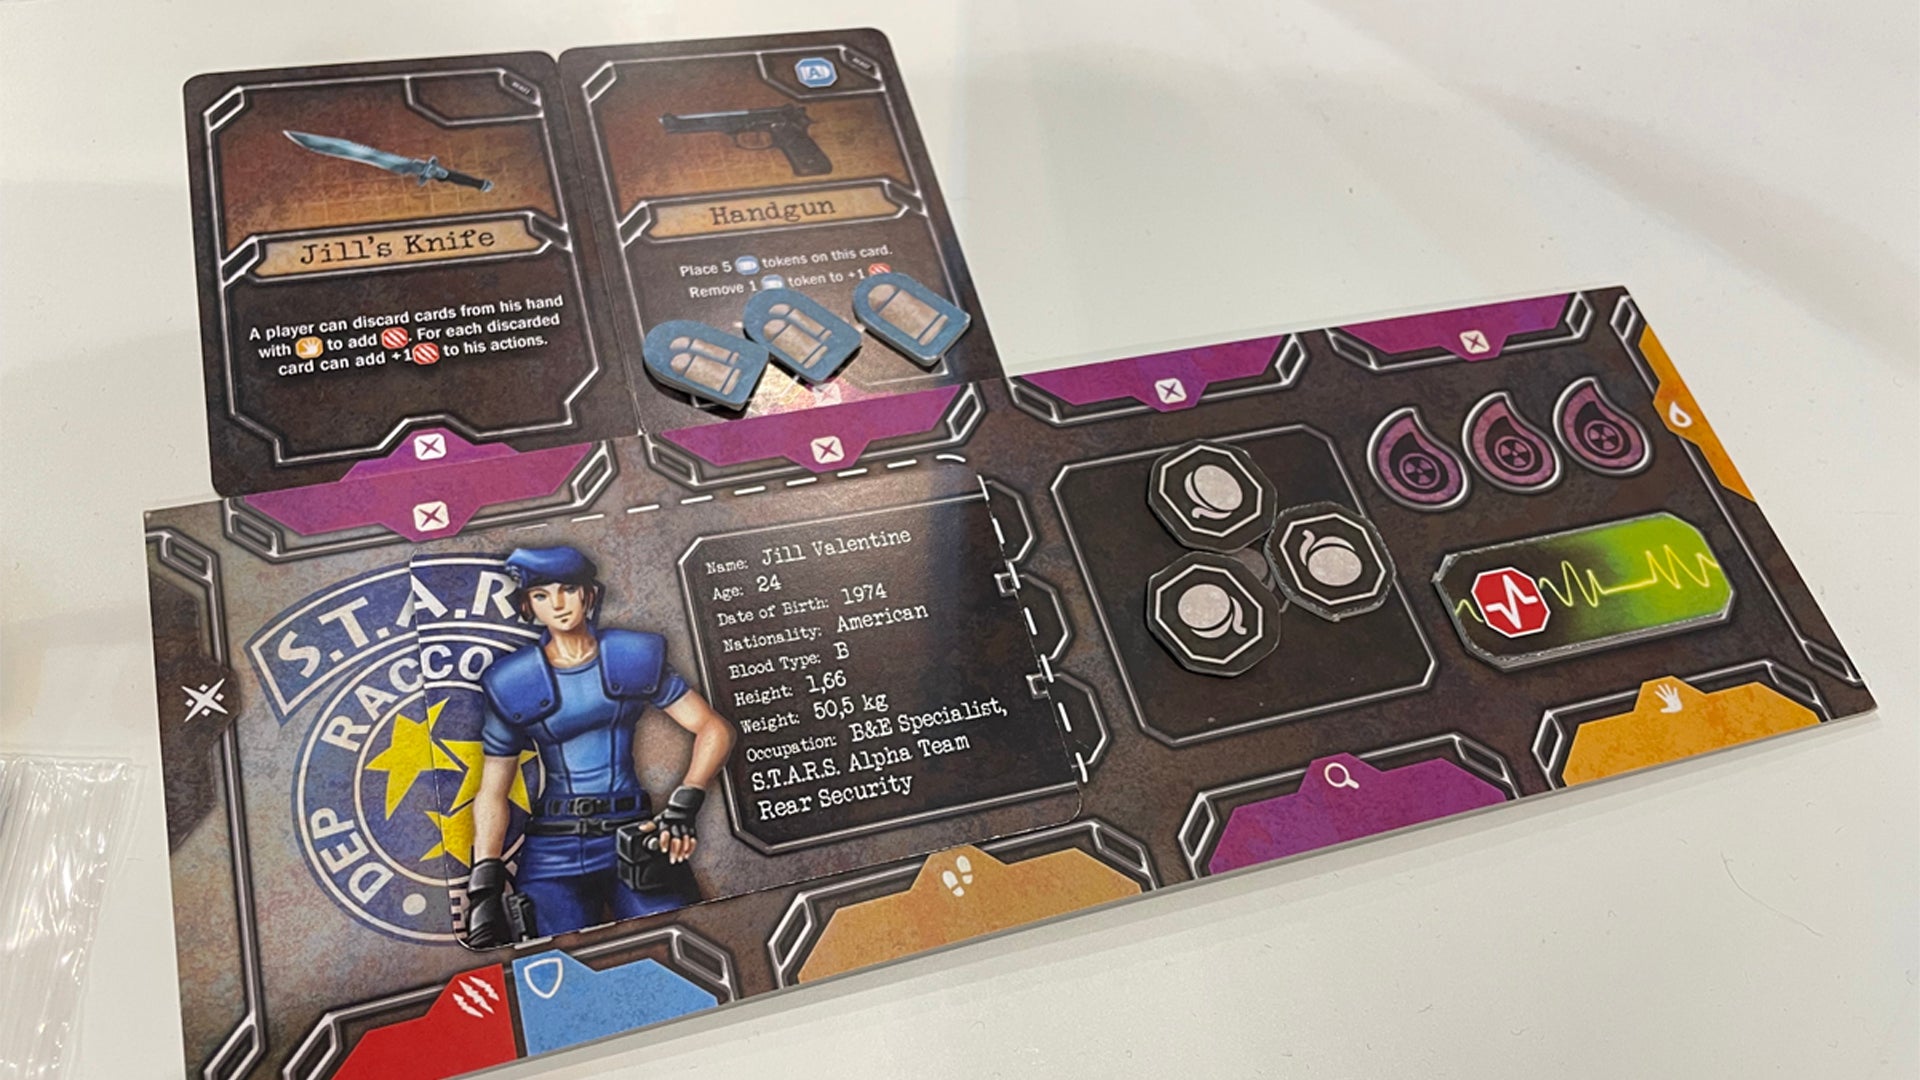 Image for Resident Evil’s new co-op card game is designed to feel like passing the controller as kids